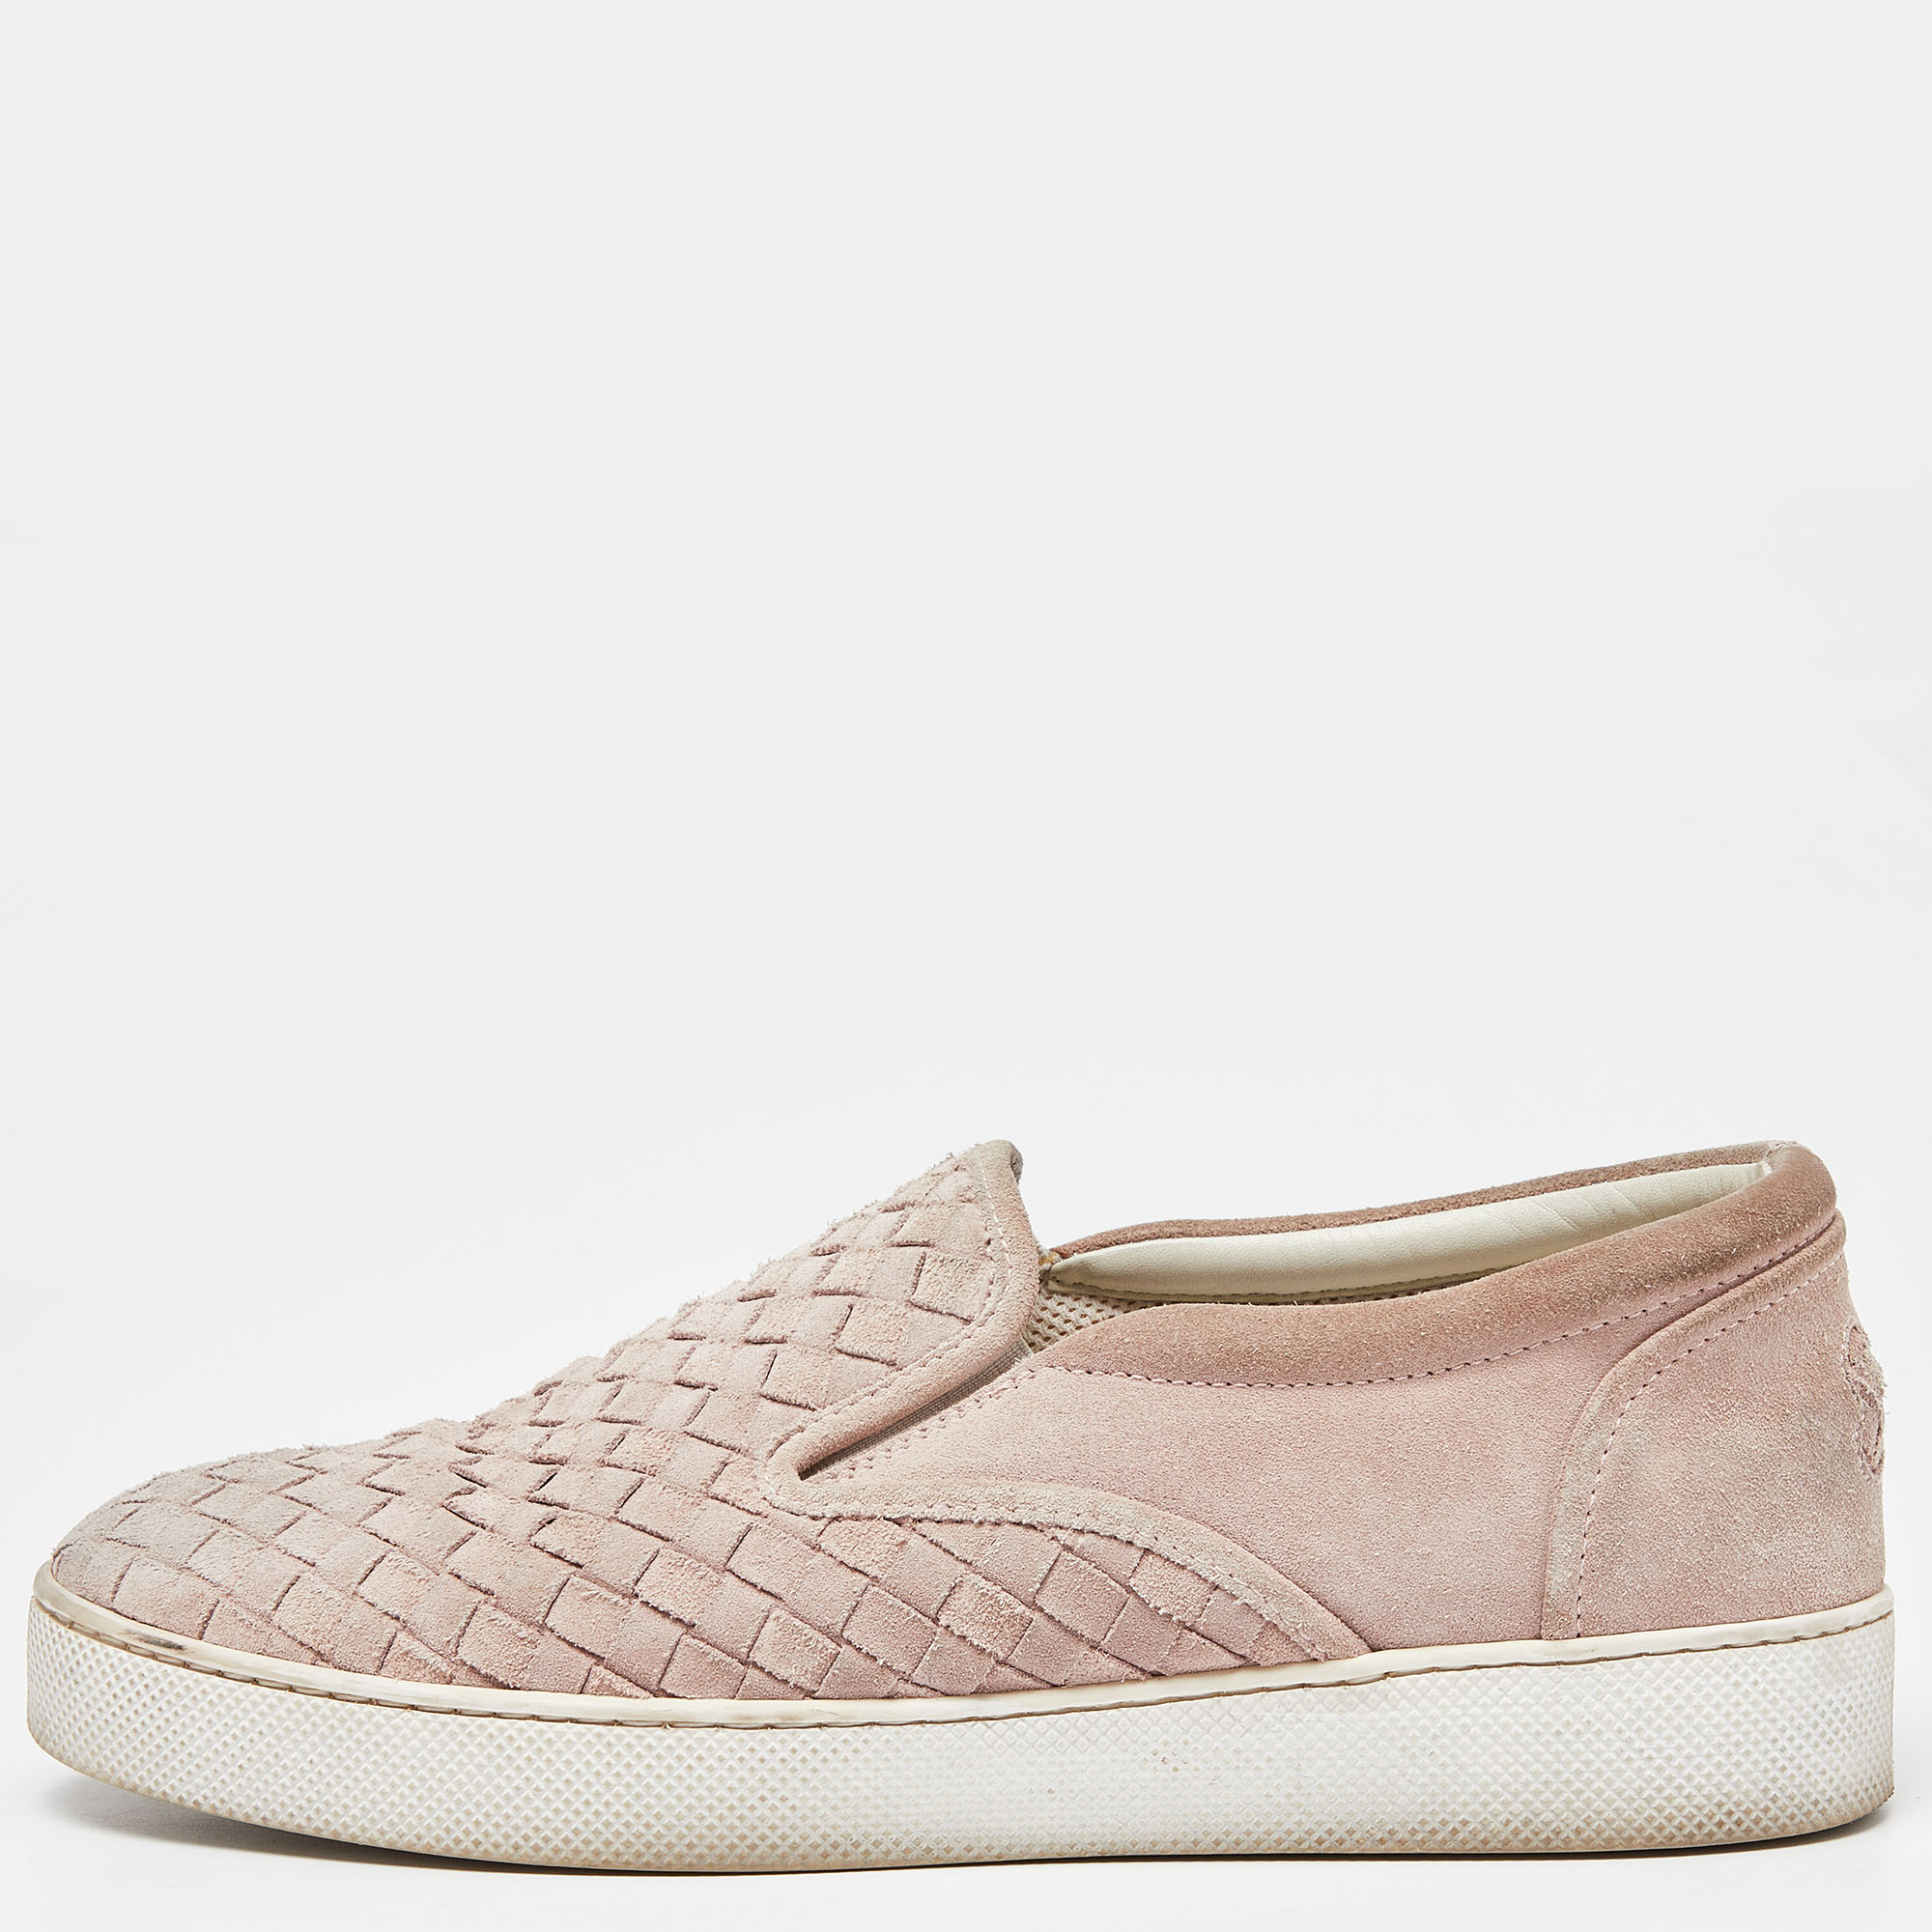 Coming in a classic silhouette these Bottega Veneta sneakers are a seamless combination of luxury comfort and style. These sneakers are designed with signature details and comfortable insoles.